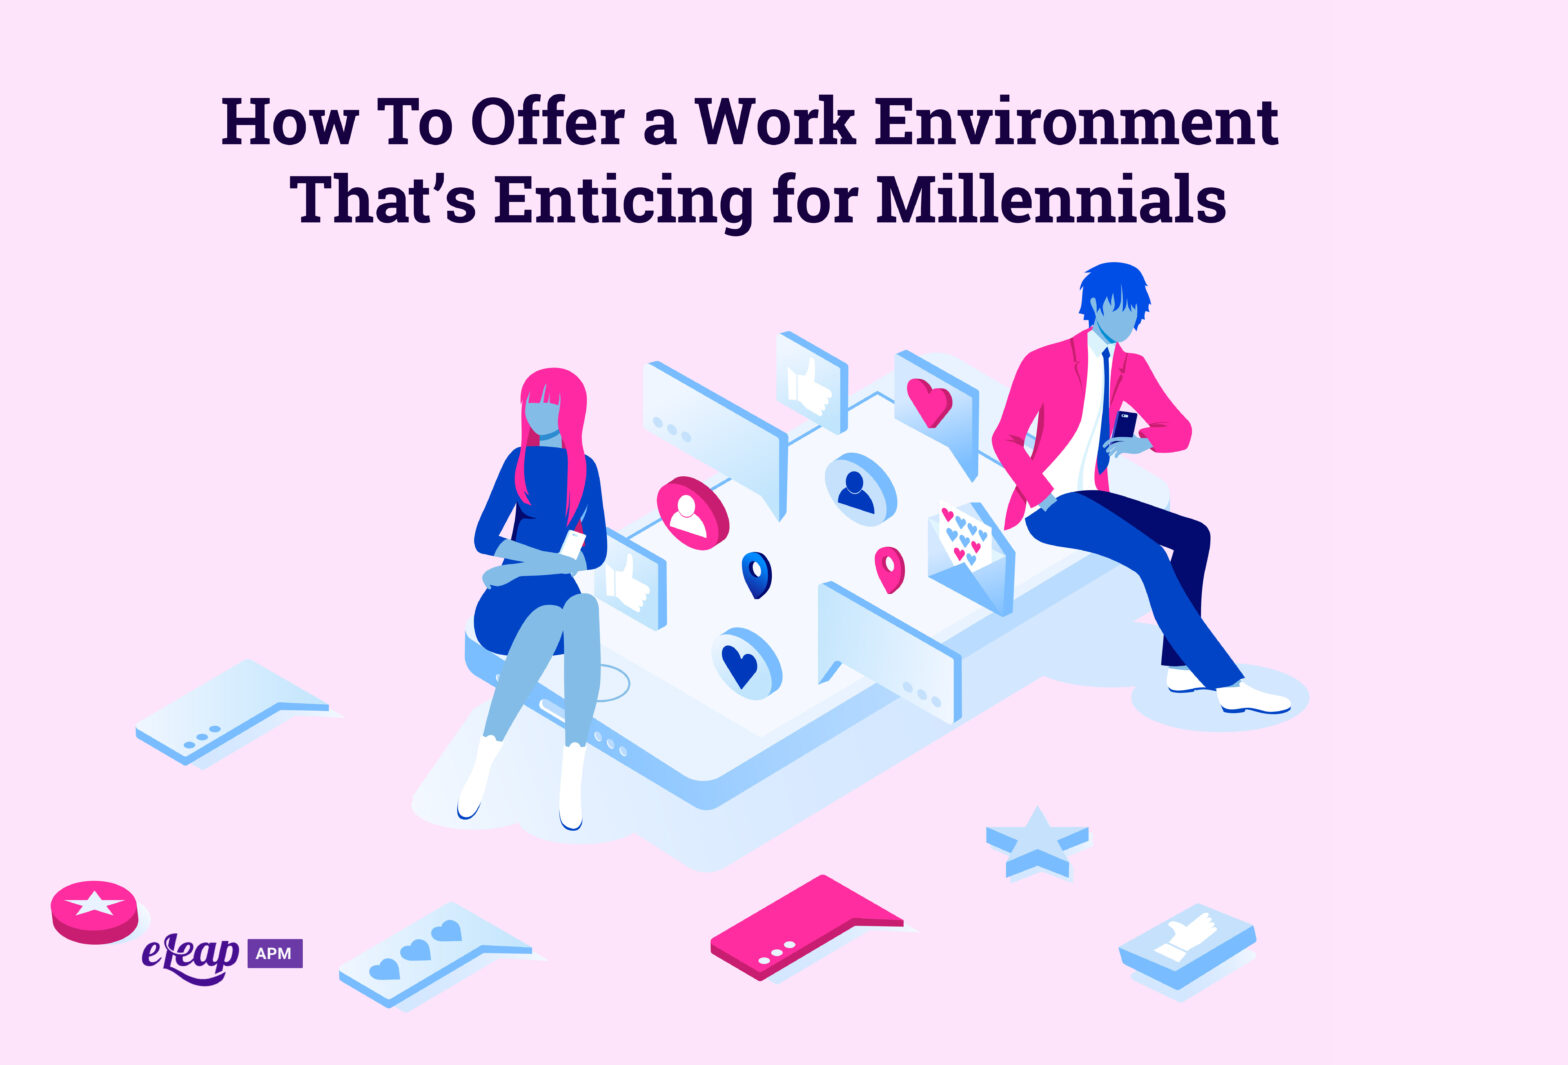 How To Offer a Work Environment That’s Enticing for Millennials